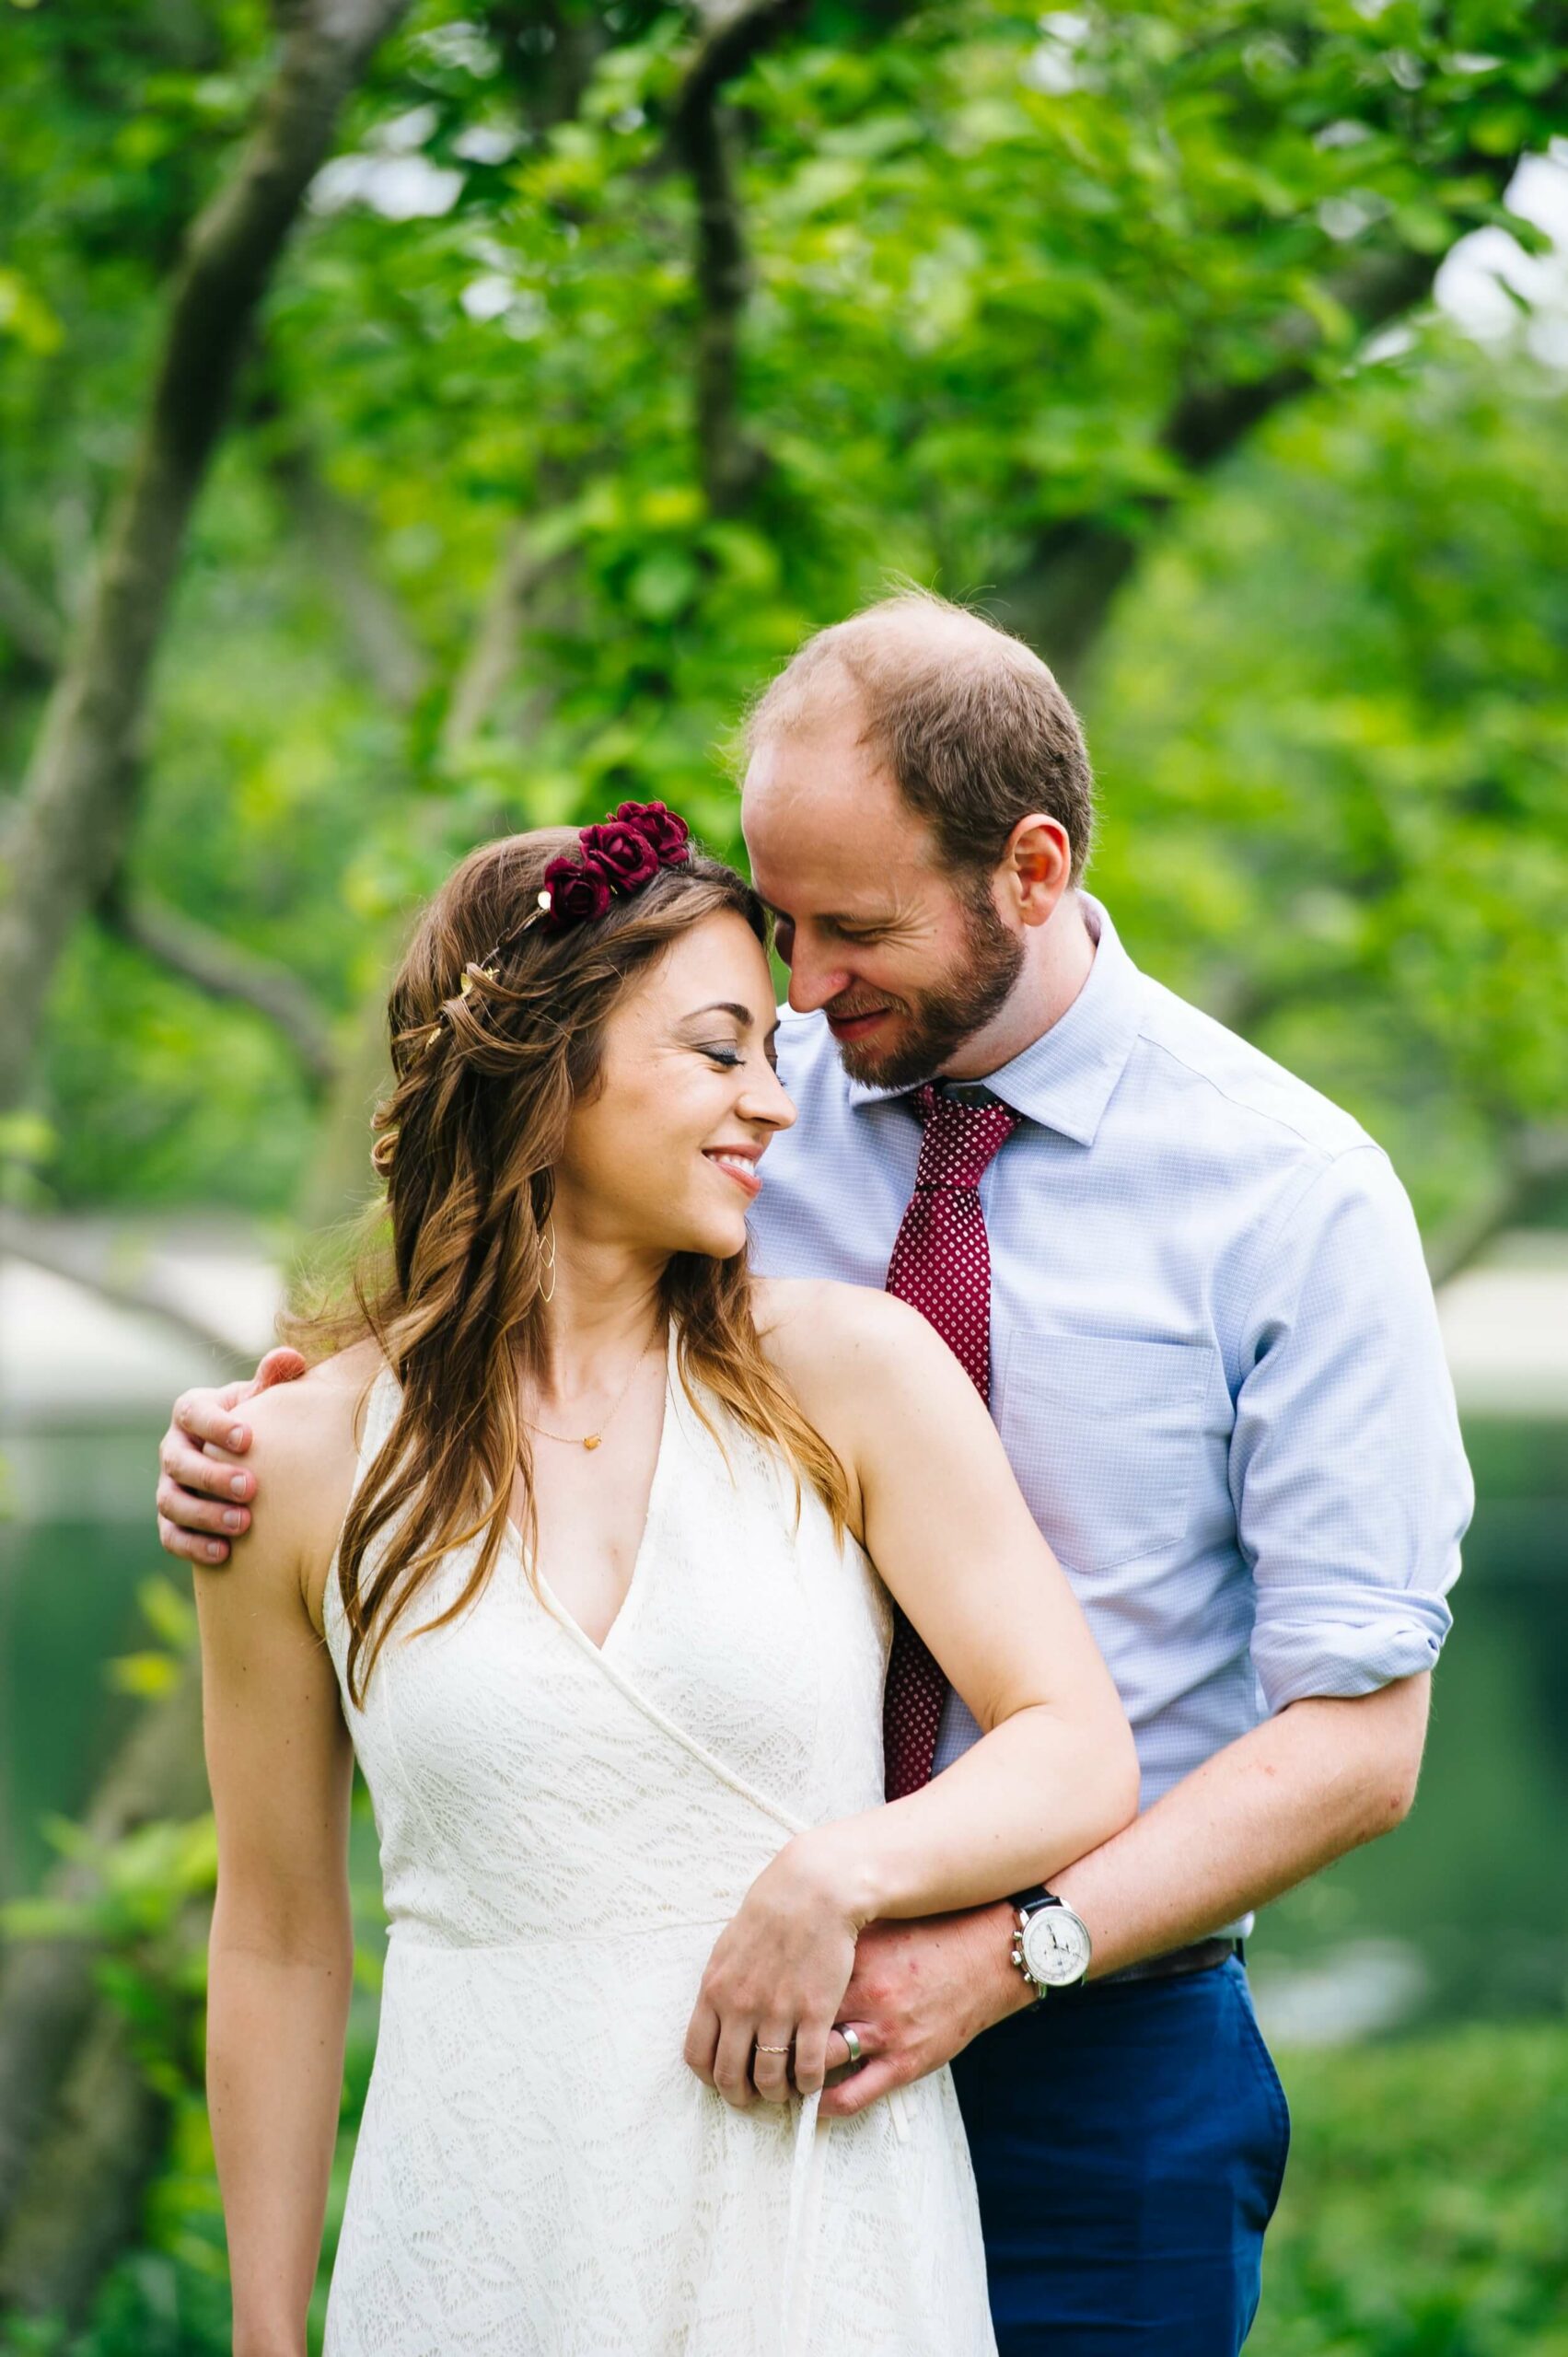 portrait of bride and groom snuggling with greenery in the background